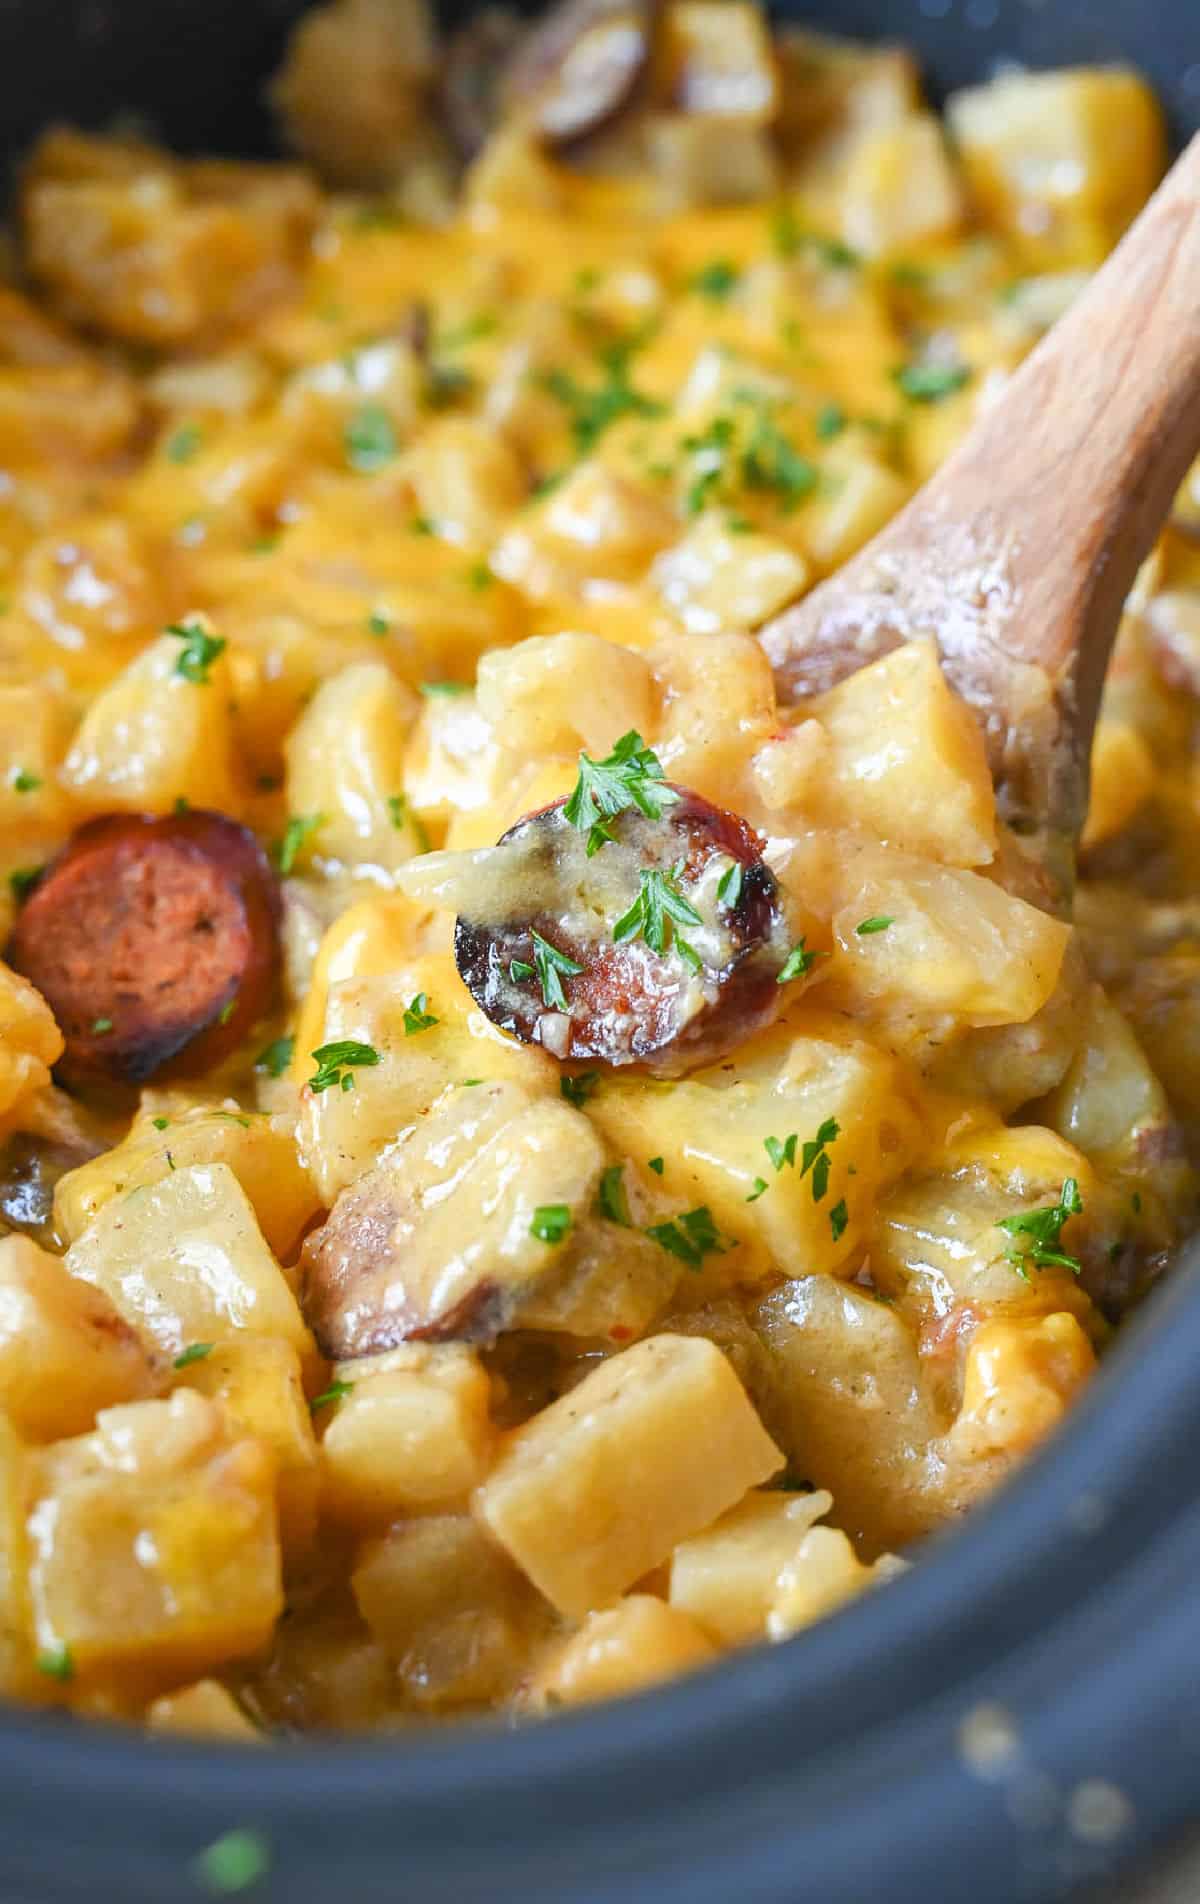 A wooden spoon scooping up some cheesy potatoes with sausage.